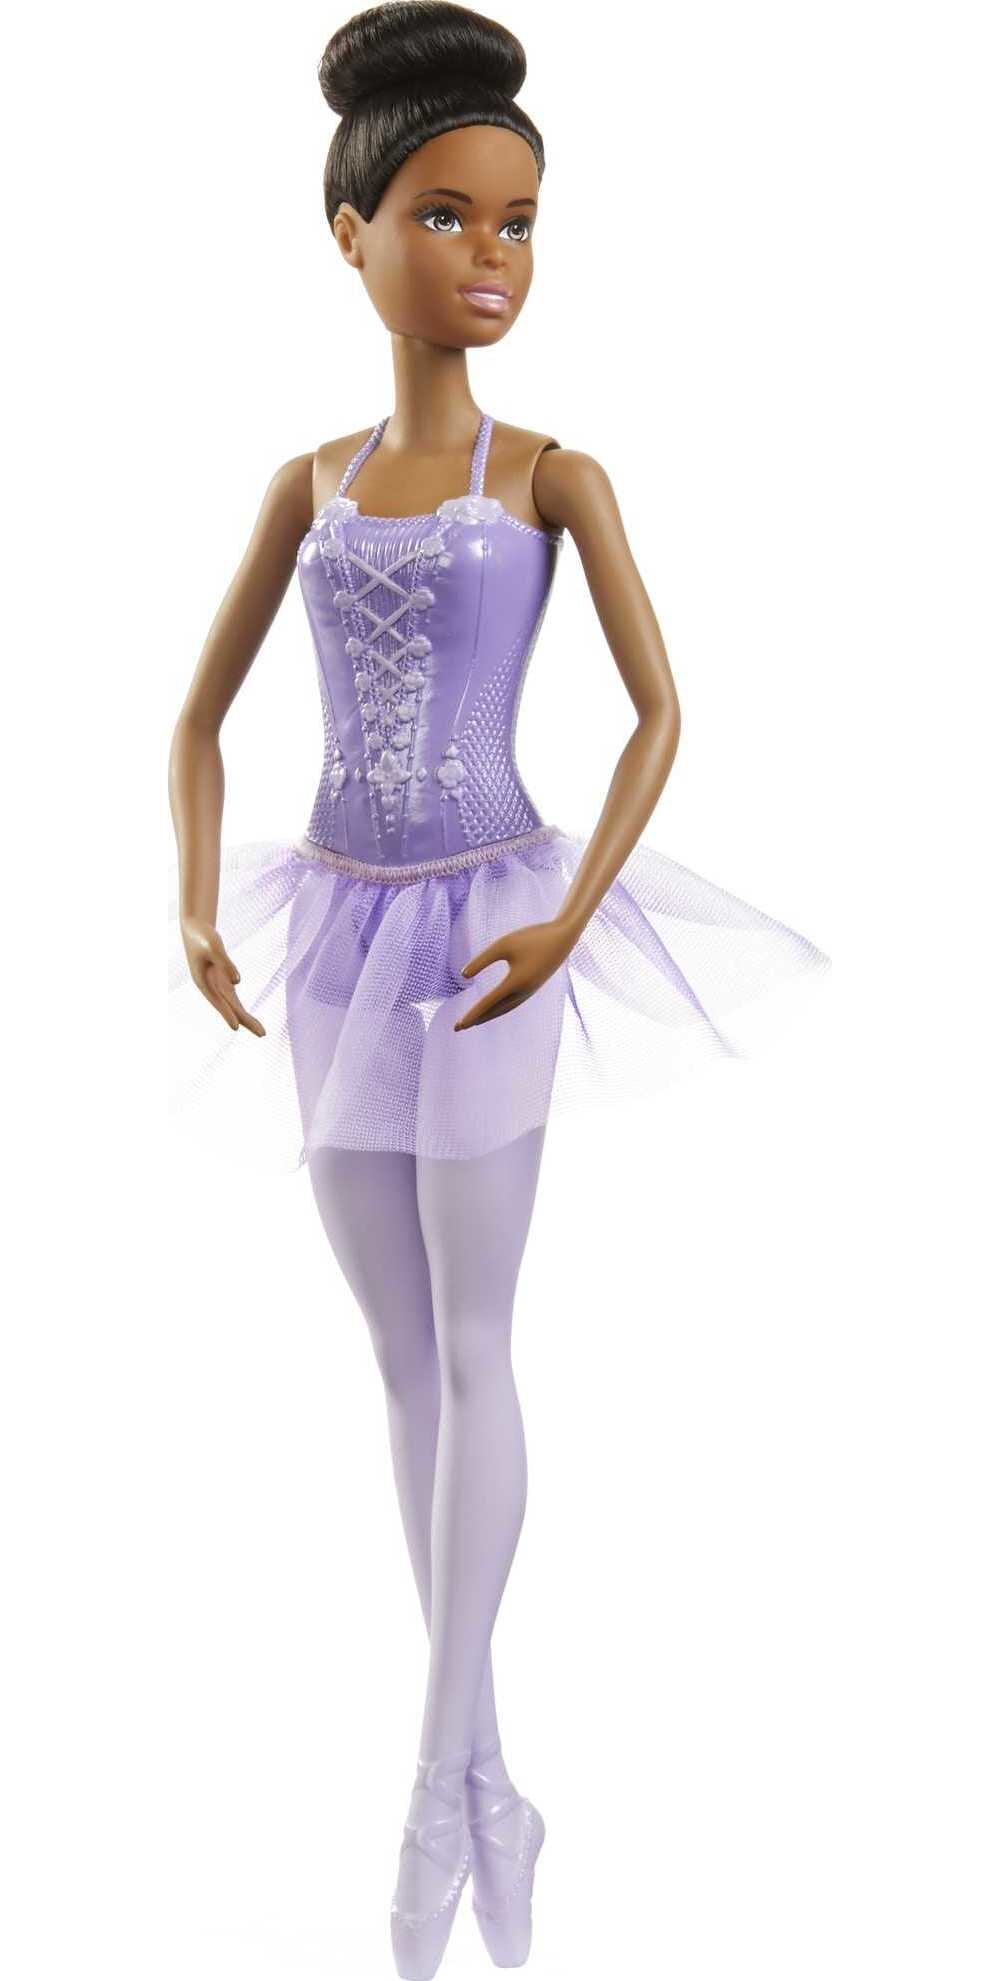 Barbie Ballerina Doll with Tutu and Sculpted Toe Shoes